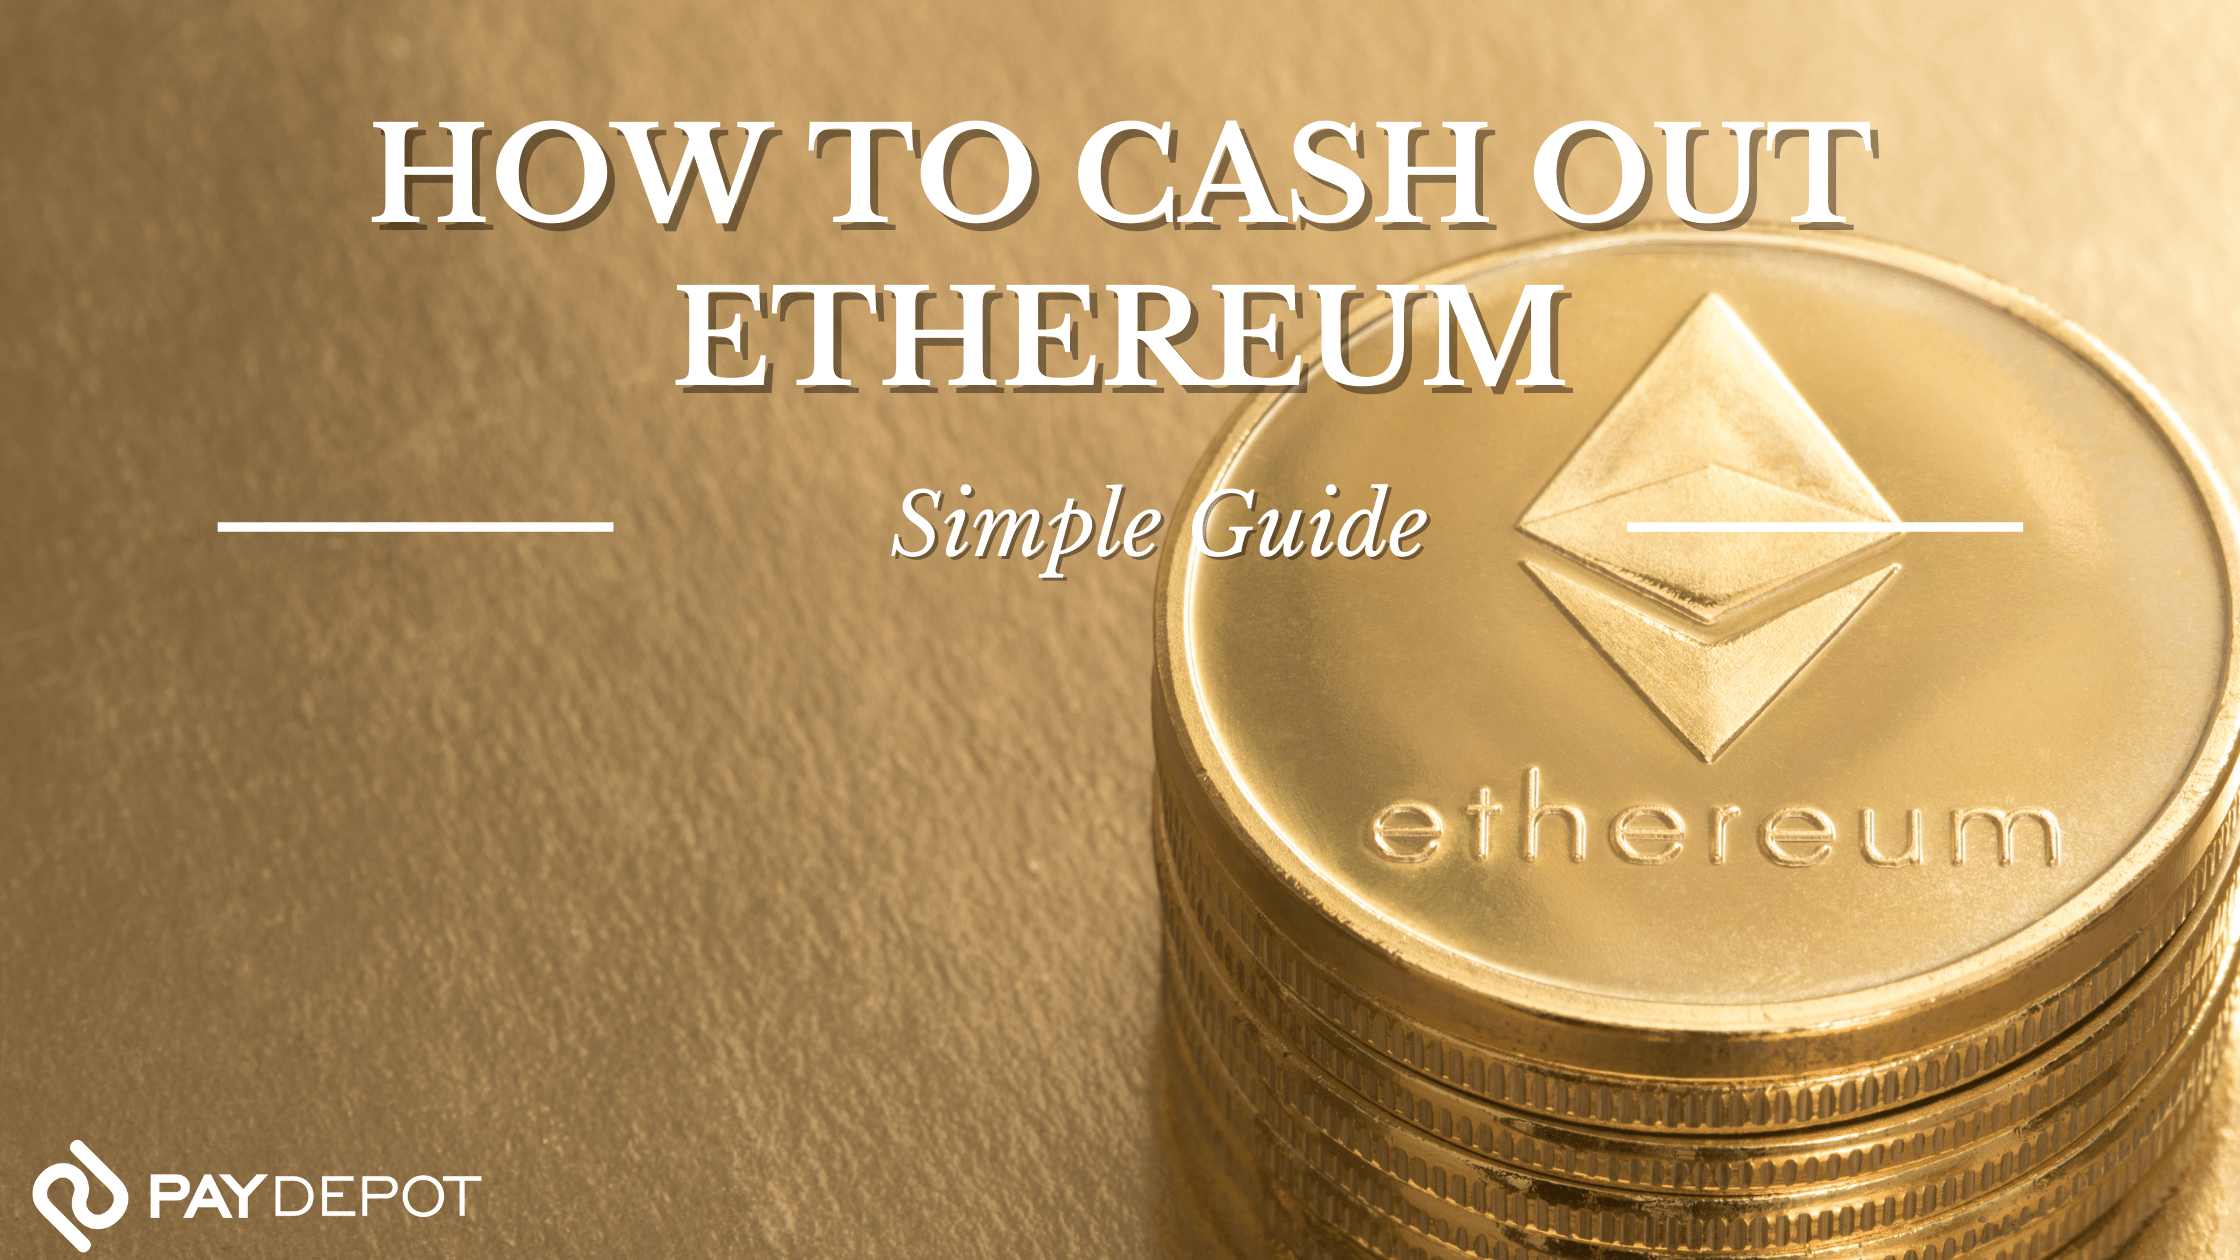 What should you know about withdrawals to Ethereum (ETH) wallets?